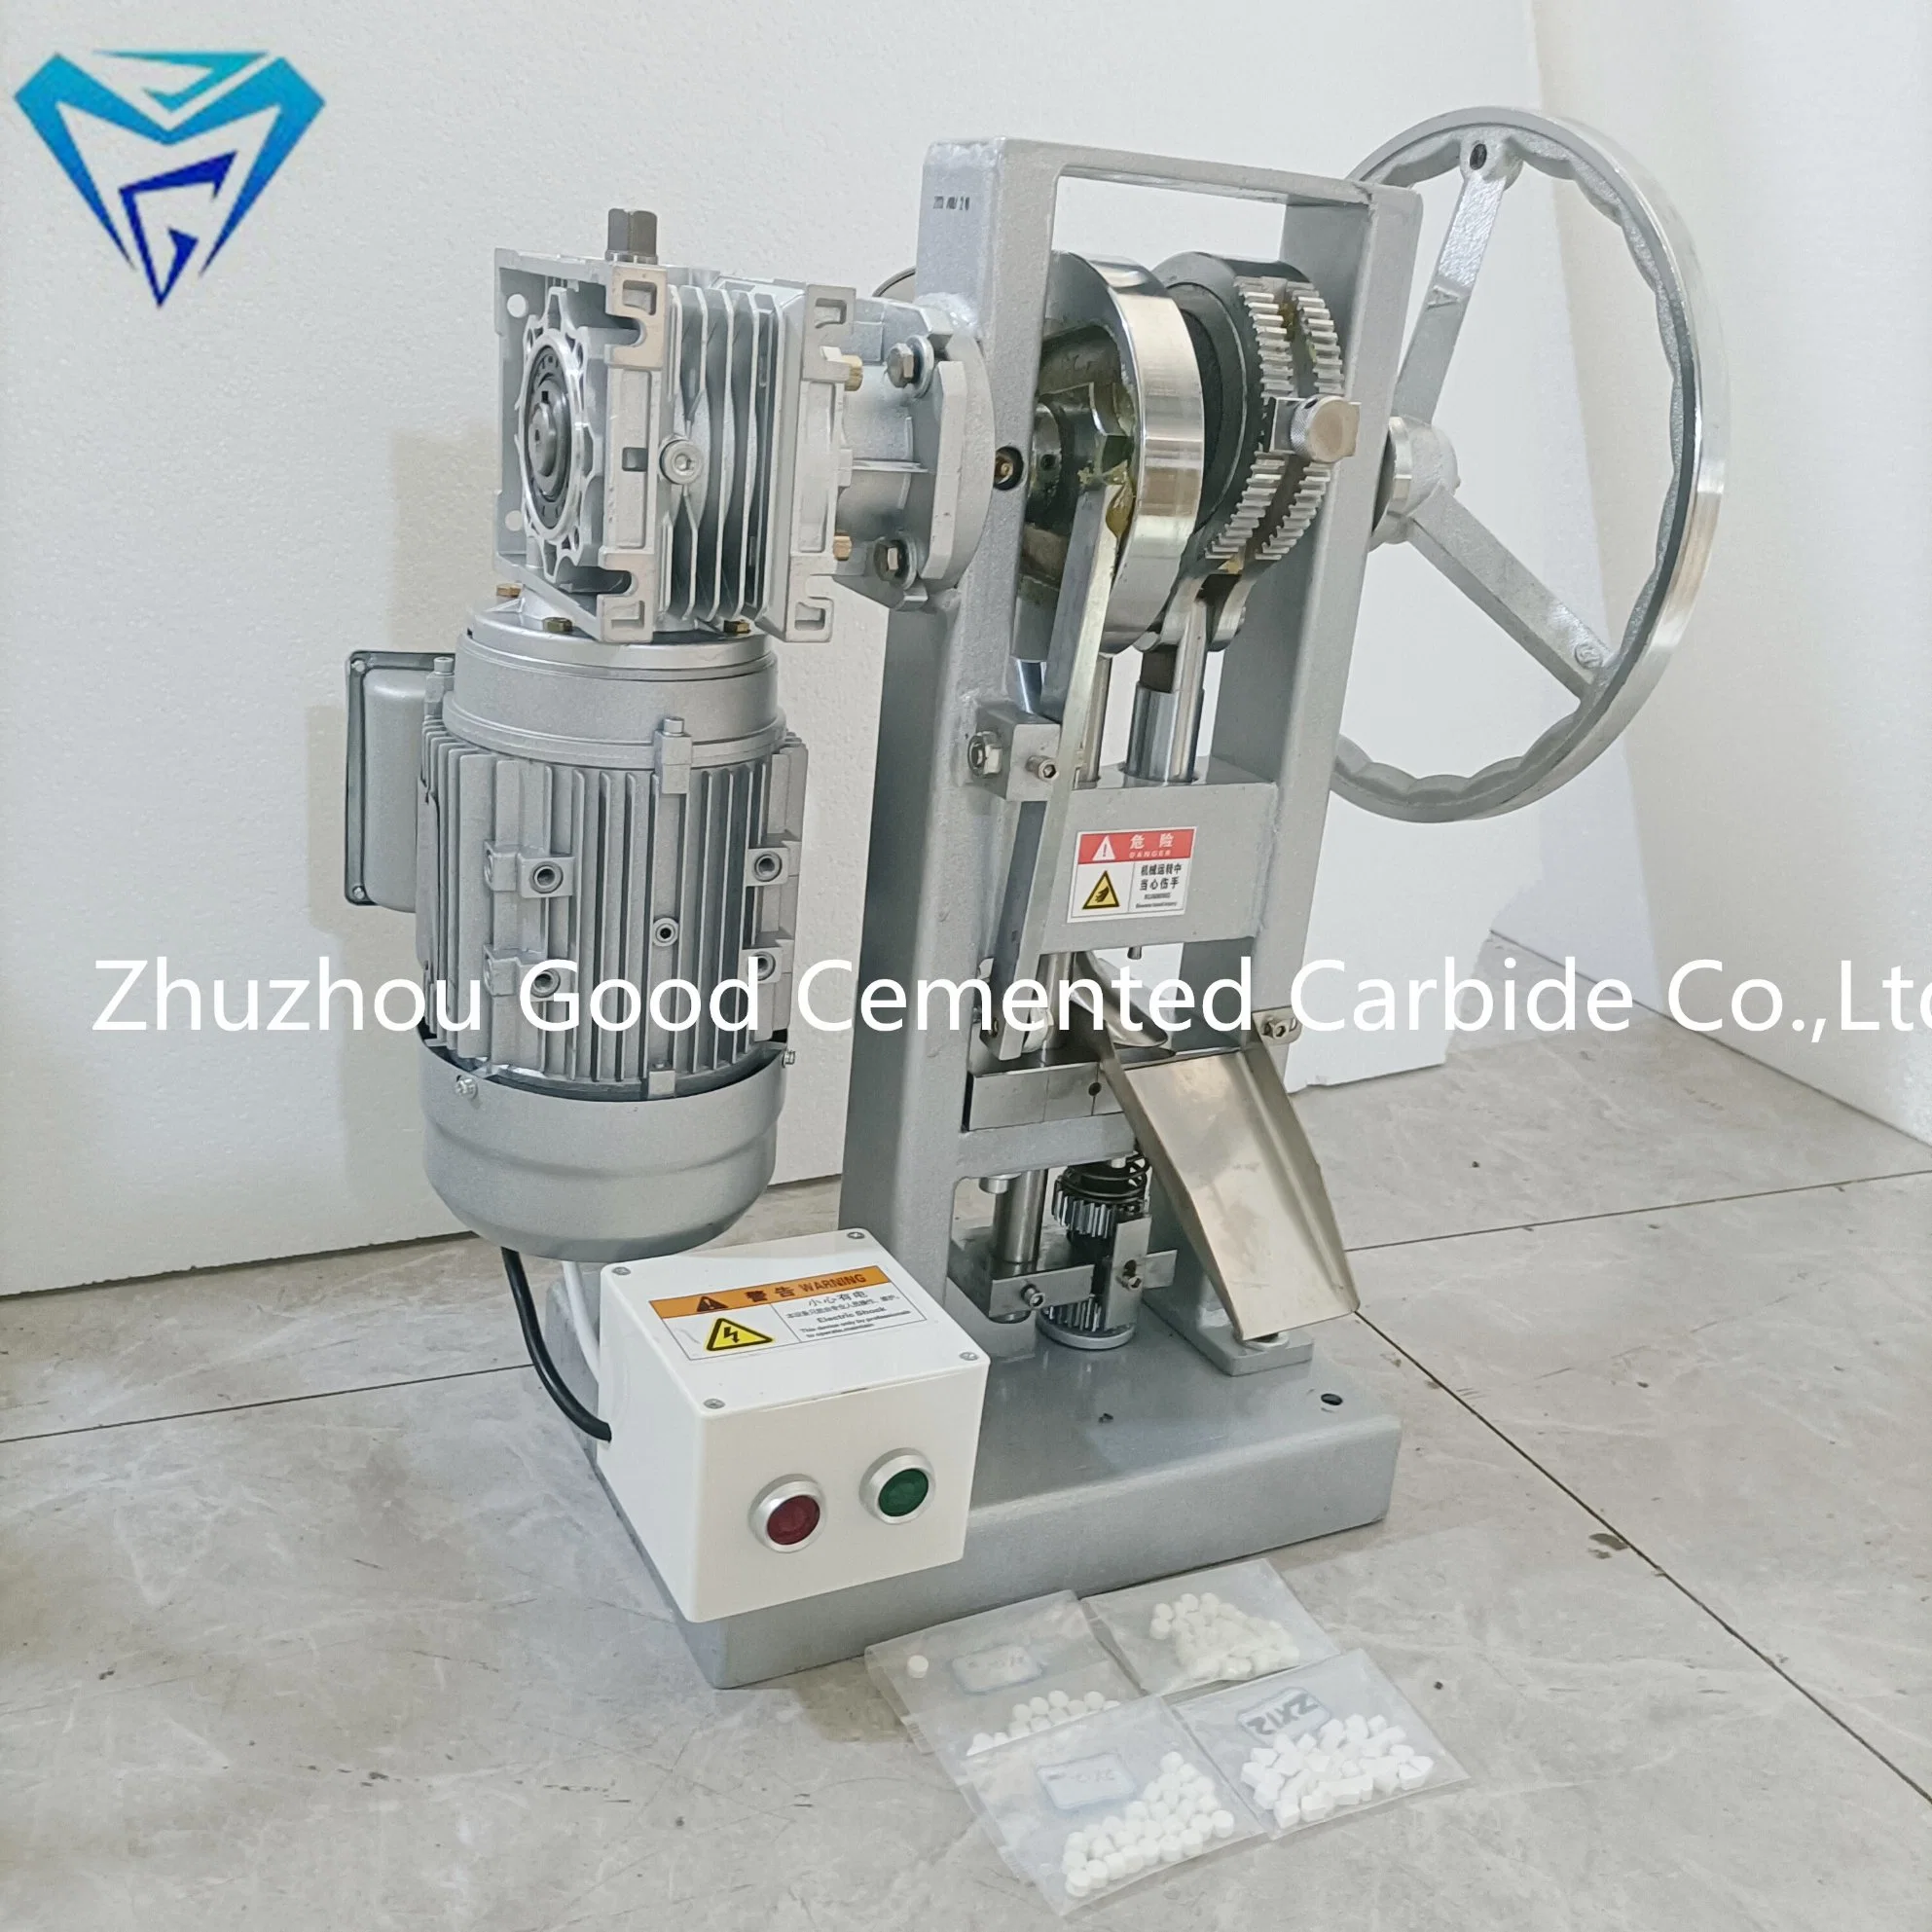 Supplier Punch Dies Candy Press Sugar Press Dies Set Tdp-0/Tdp1.5/Tdp5/Tdp6 Moulds for Rotary Machine Candy Making Machine with High quality/High cost performance 